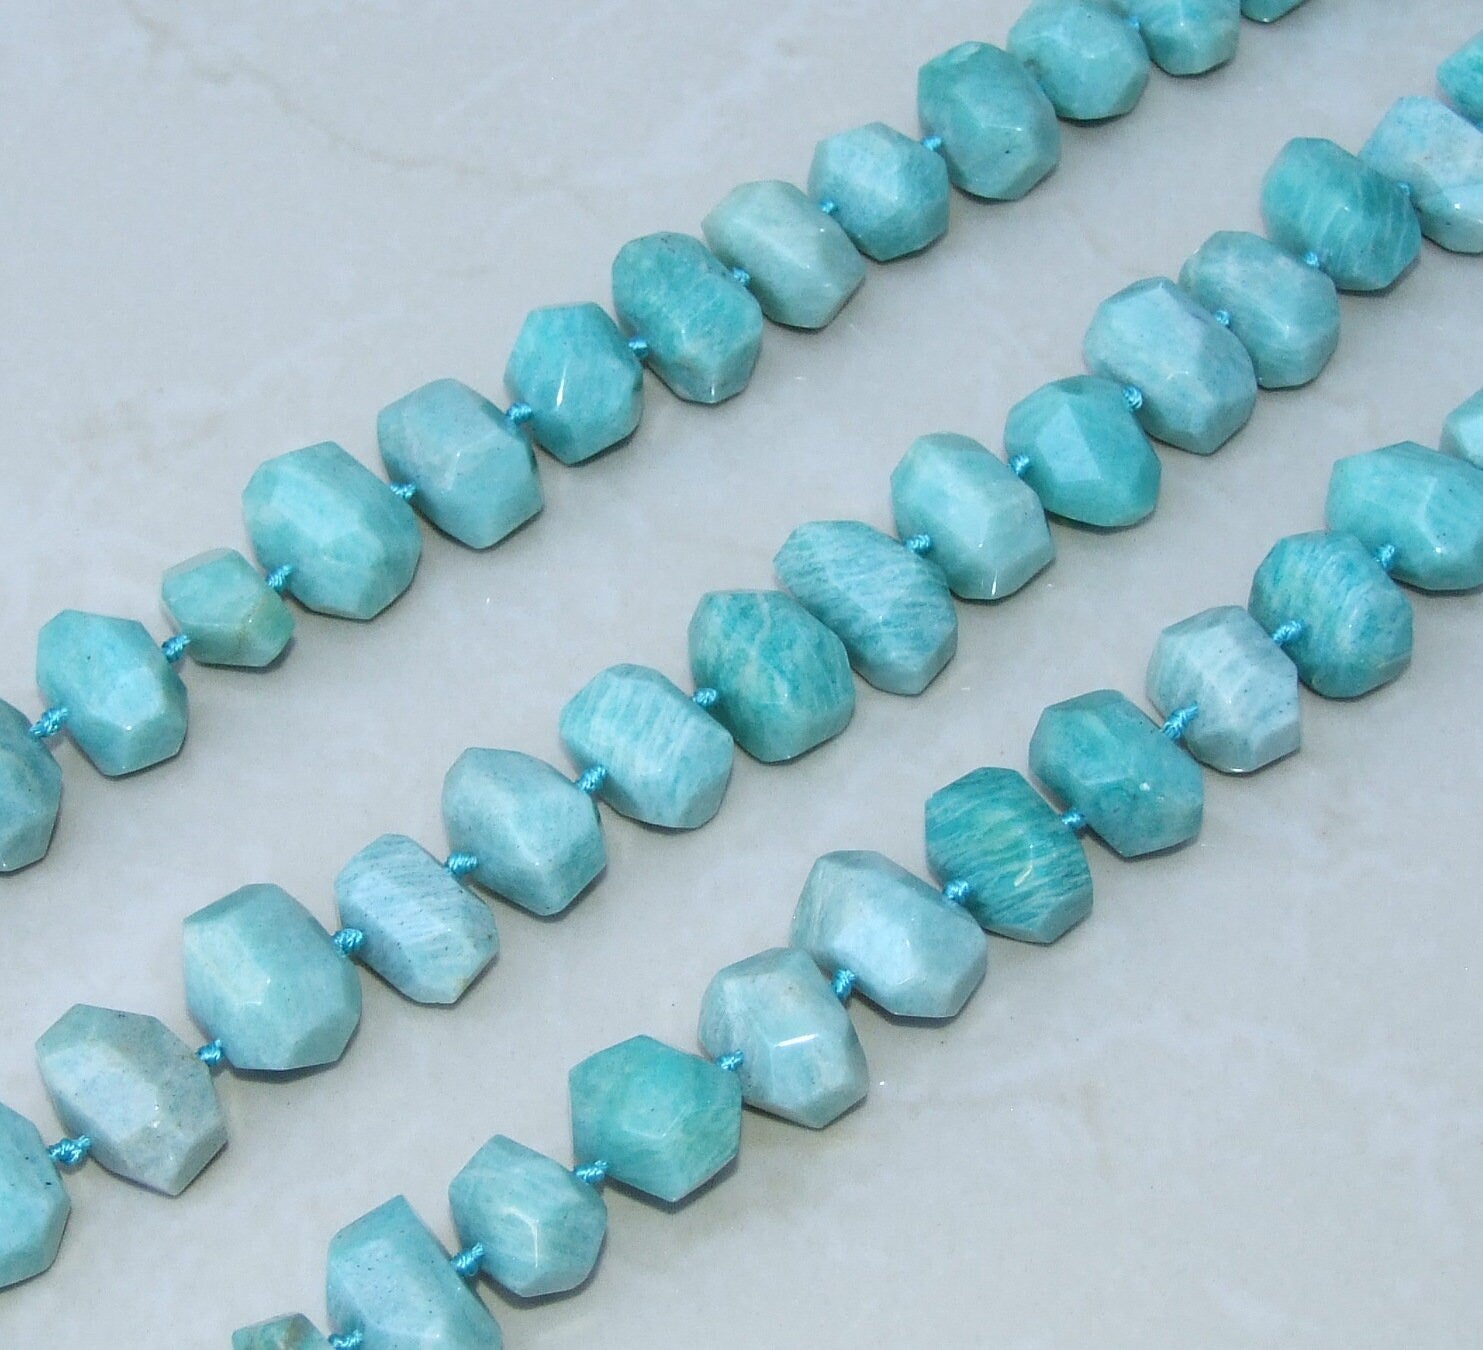 Amazonite Faceted Nugget, Gemstone Beads, Polished Amazonite, Amazonite Bead, Amazonite Pendant, Jewelry Stones, Half Strand - 18mm to 24mm